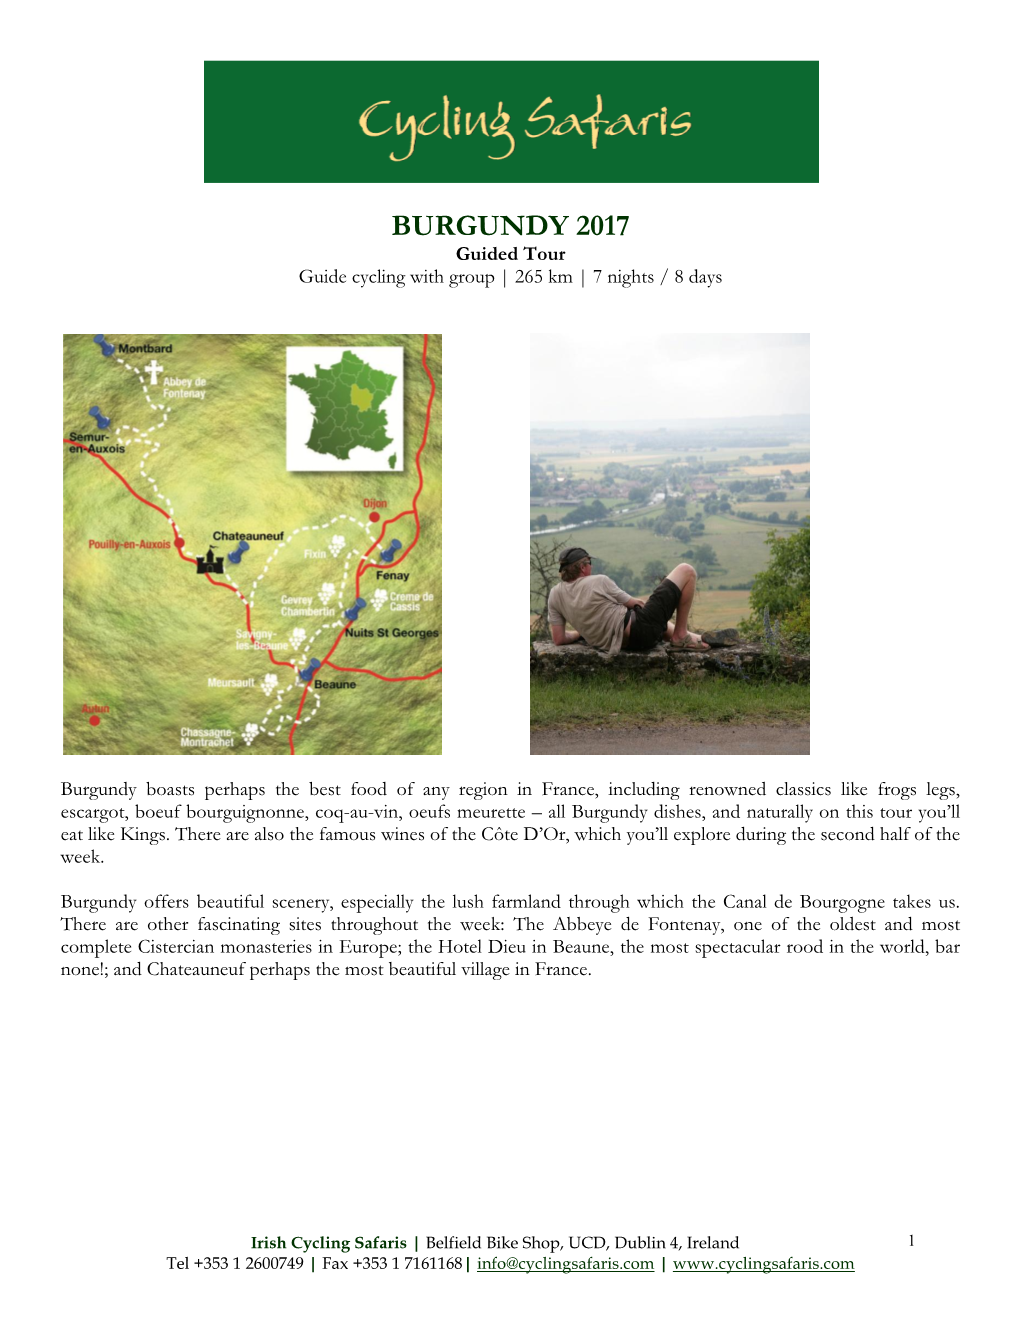 BURGUNDY 2017 Guided Tour Guide Cycling with Group | 265 Km | 7 Nights / 8 Days